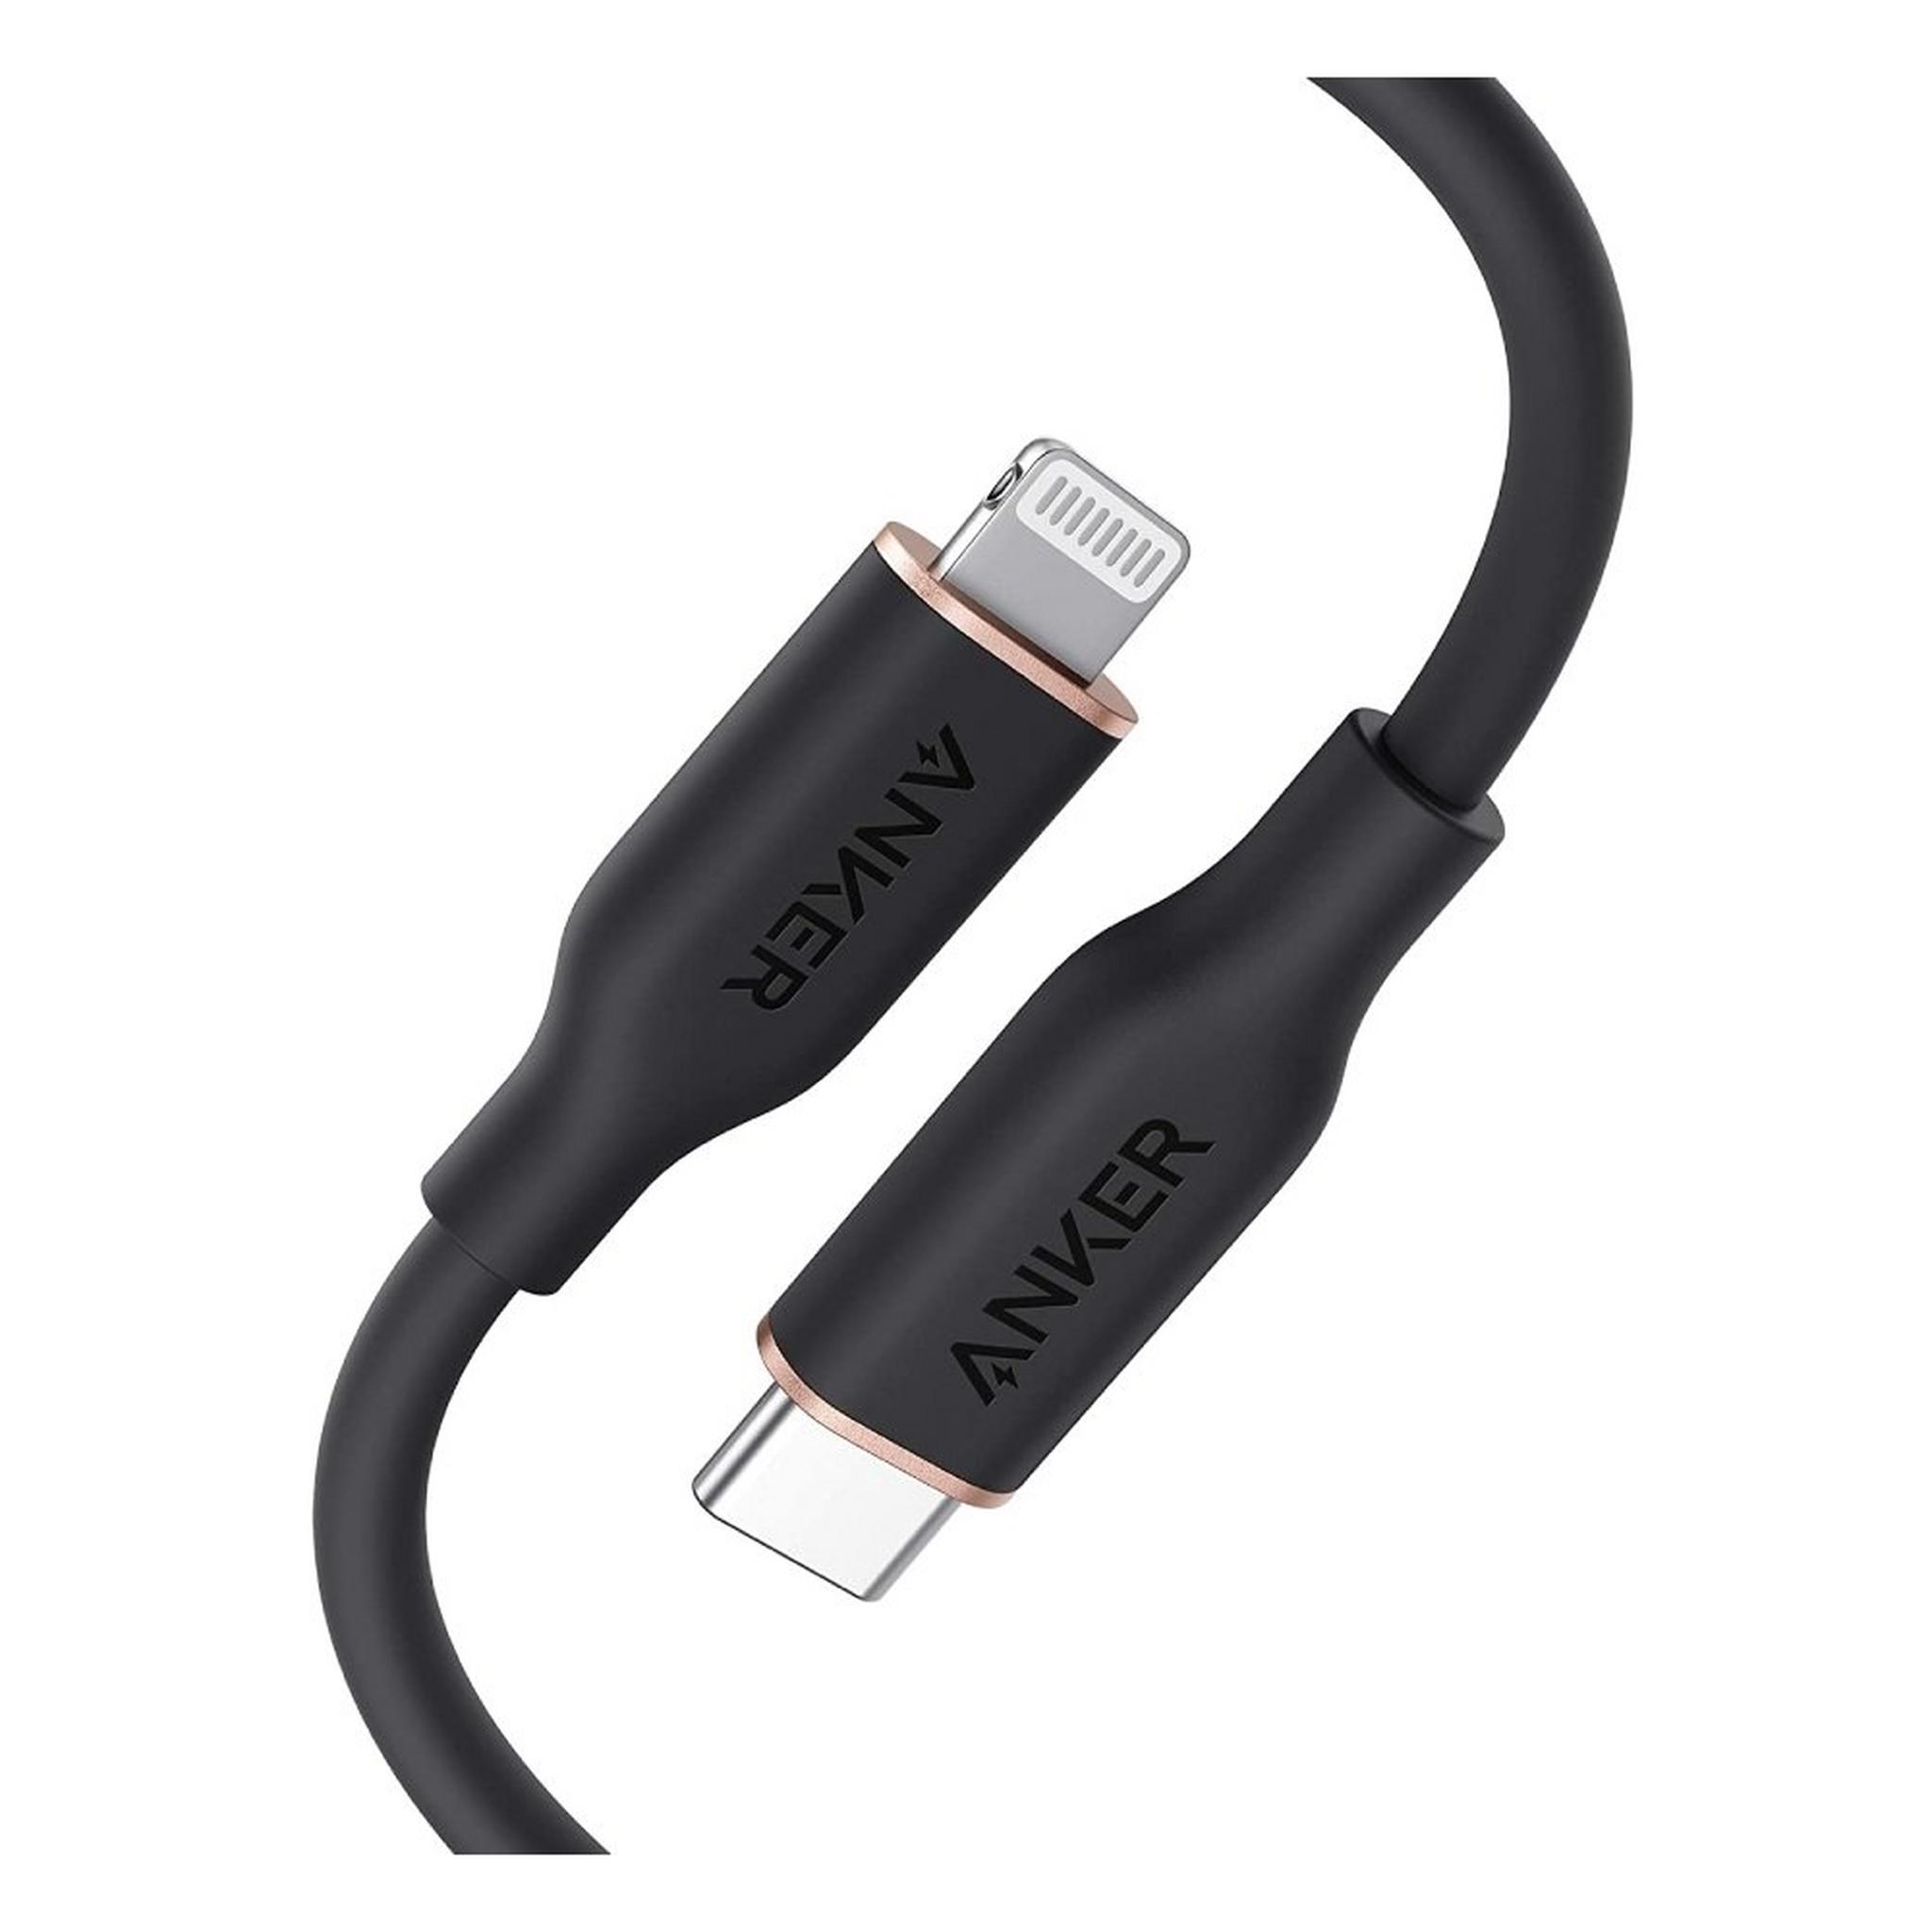 Anker PowerLine III Flow USB-C to Lightning 6ft Cable - Black